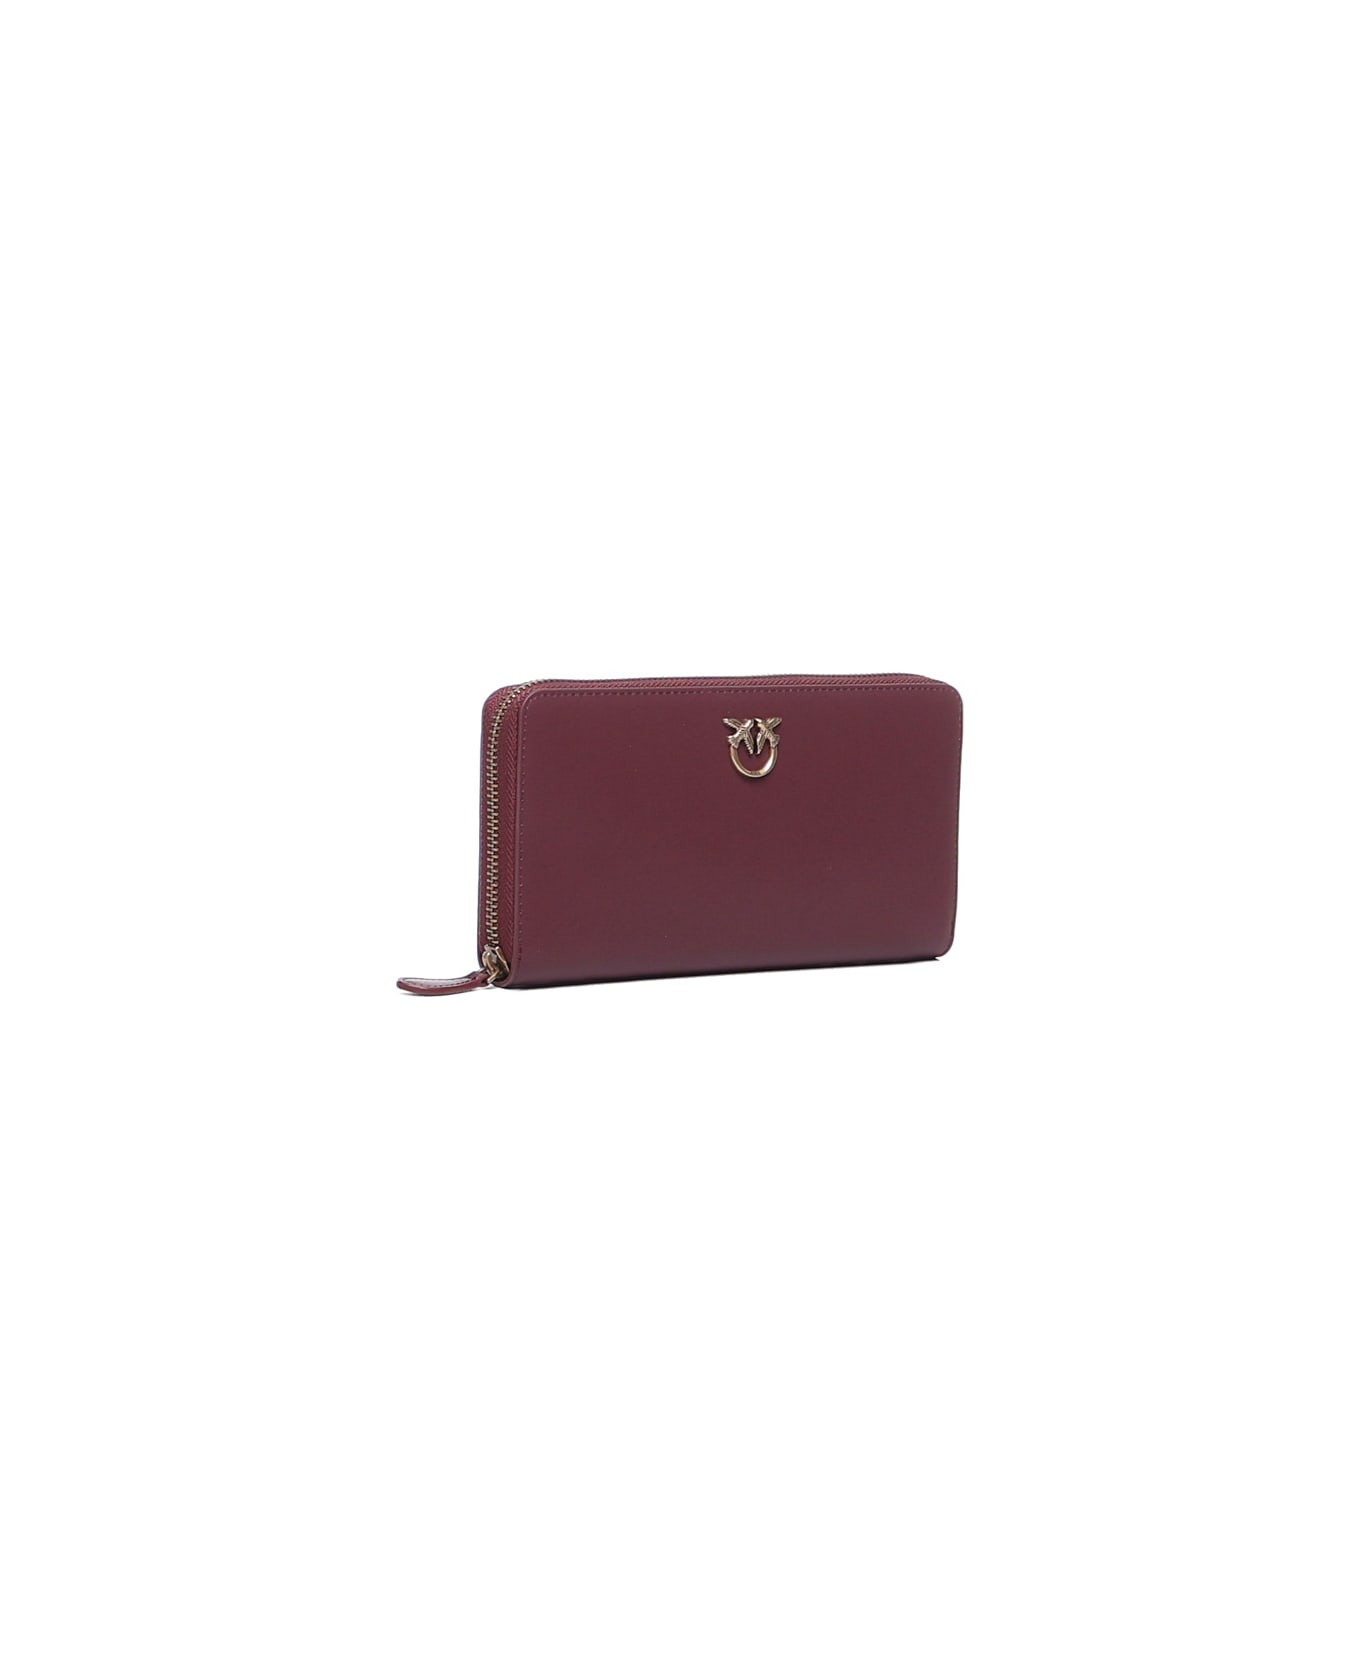 Pinko Ryder Leather Wallet - RIBES INTENSO  ANTIQUE GOLD クラッチバッグ